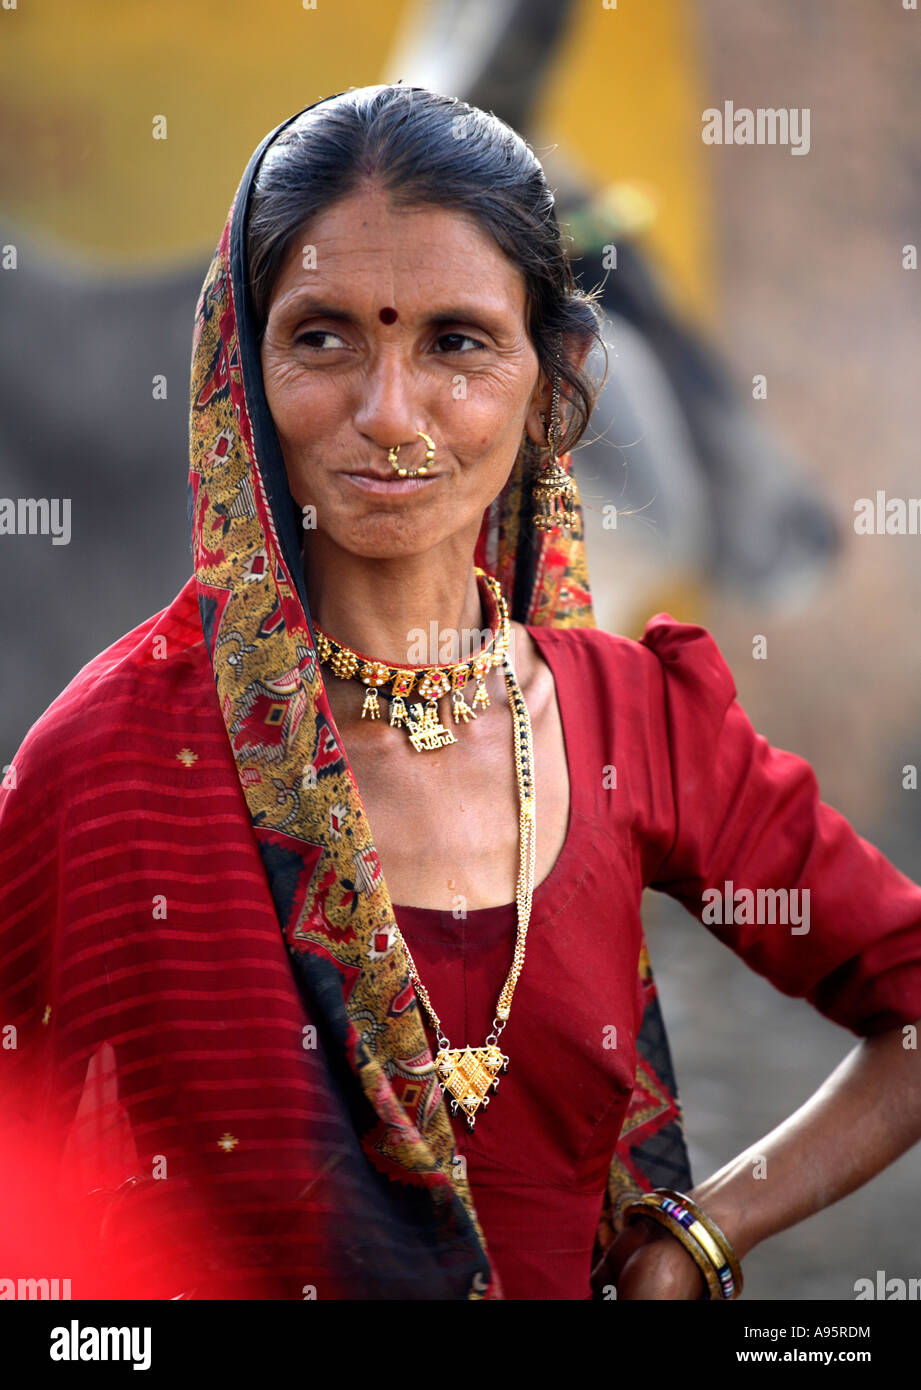 Tribal Indian woman from Kutch district at bus-stand, Bhuj, Gujarat, India Stock Photo